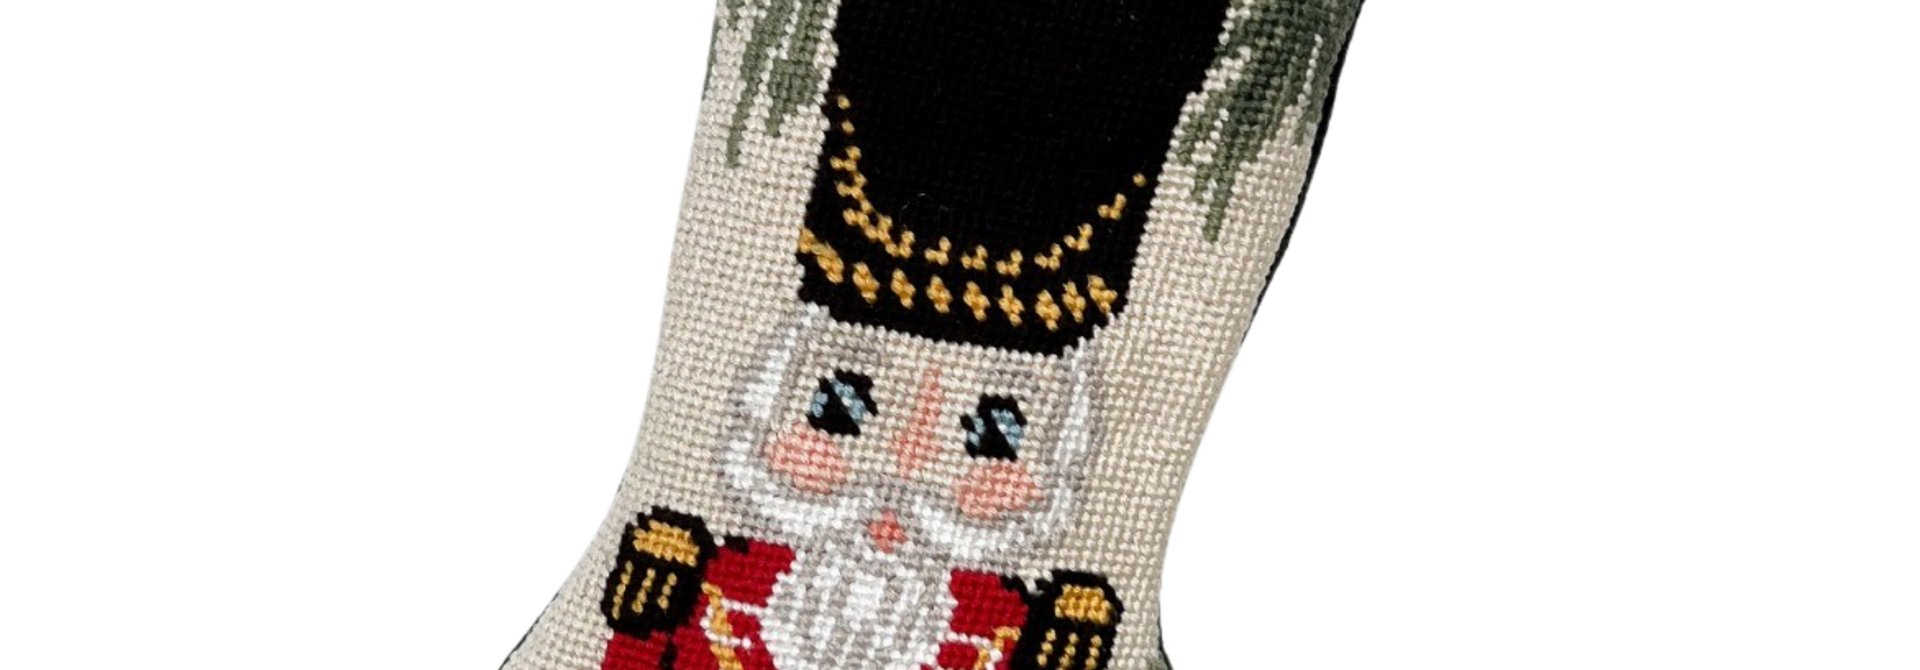 Nutcracker in Red | The Bauble Stocking Collection - 4.25 Inch x 6 Inch